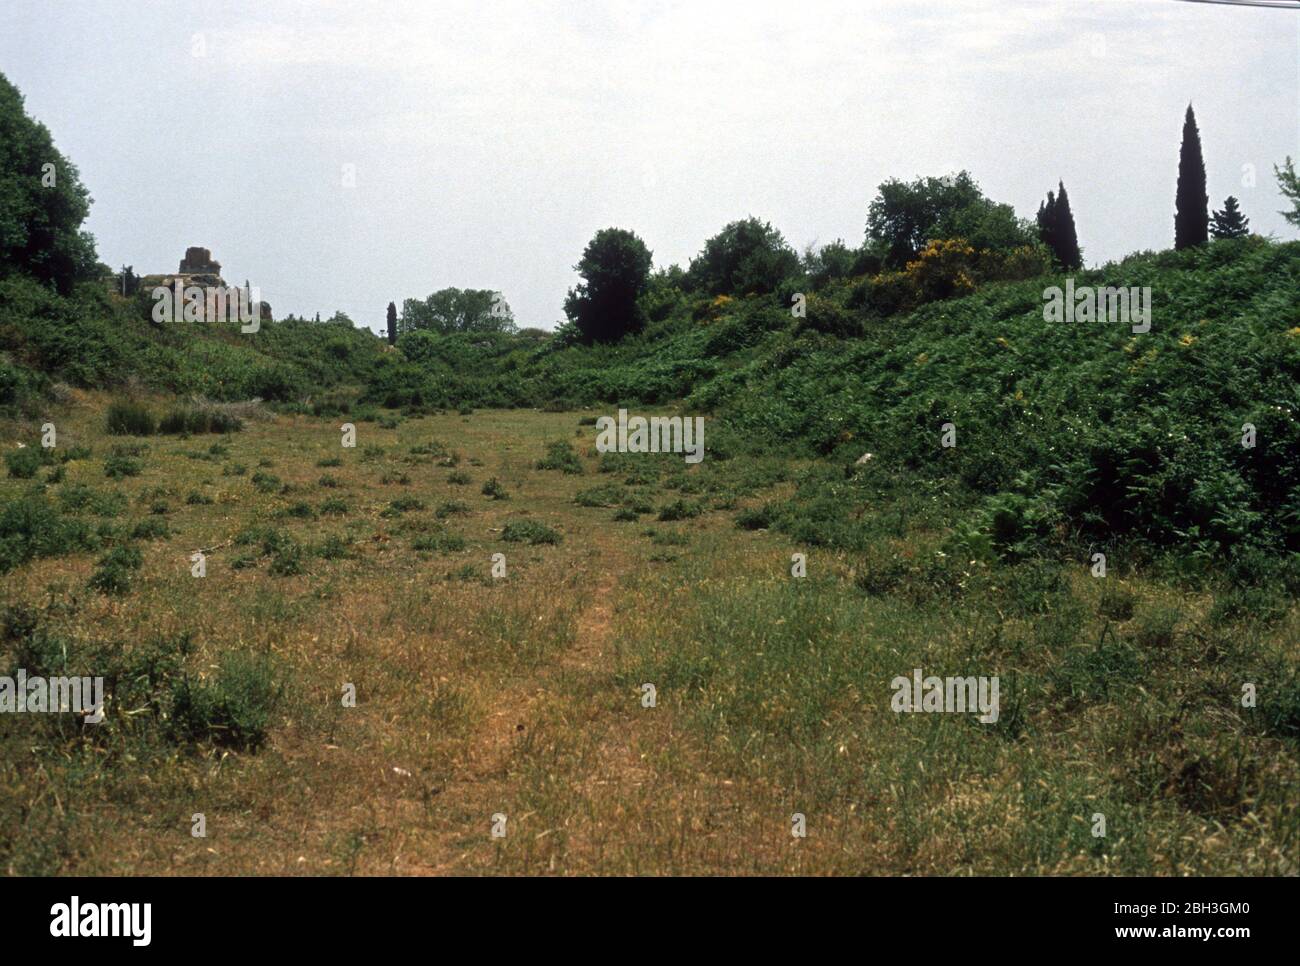 The overgrown stadium of the ancient Roman city of Nicopolis, before excavation. Nicopolis was built by Augustus Caesar (formerly Octavian) to commemorate his victory over the fleets of Mark Antony and Cleopatra in the naval battle of Actium, which took place nearby. Near Preveza, Epirus, Greece. Nicopolis has tentative status as a UNESCO World Heritage Site. Stock Photo